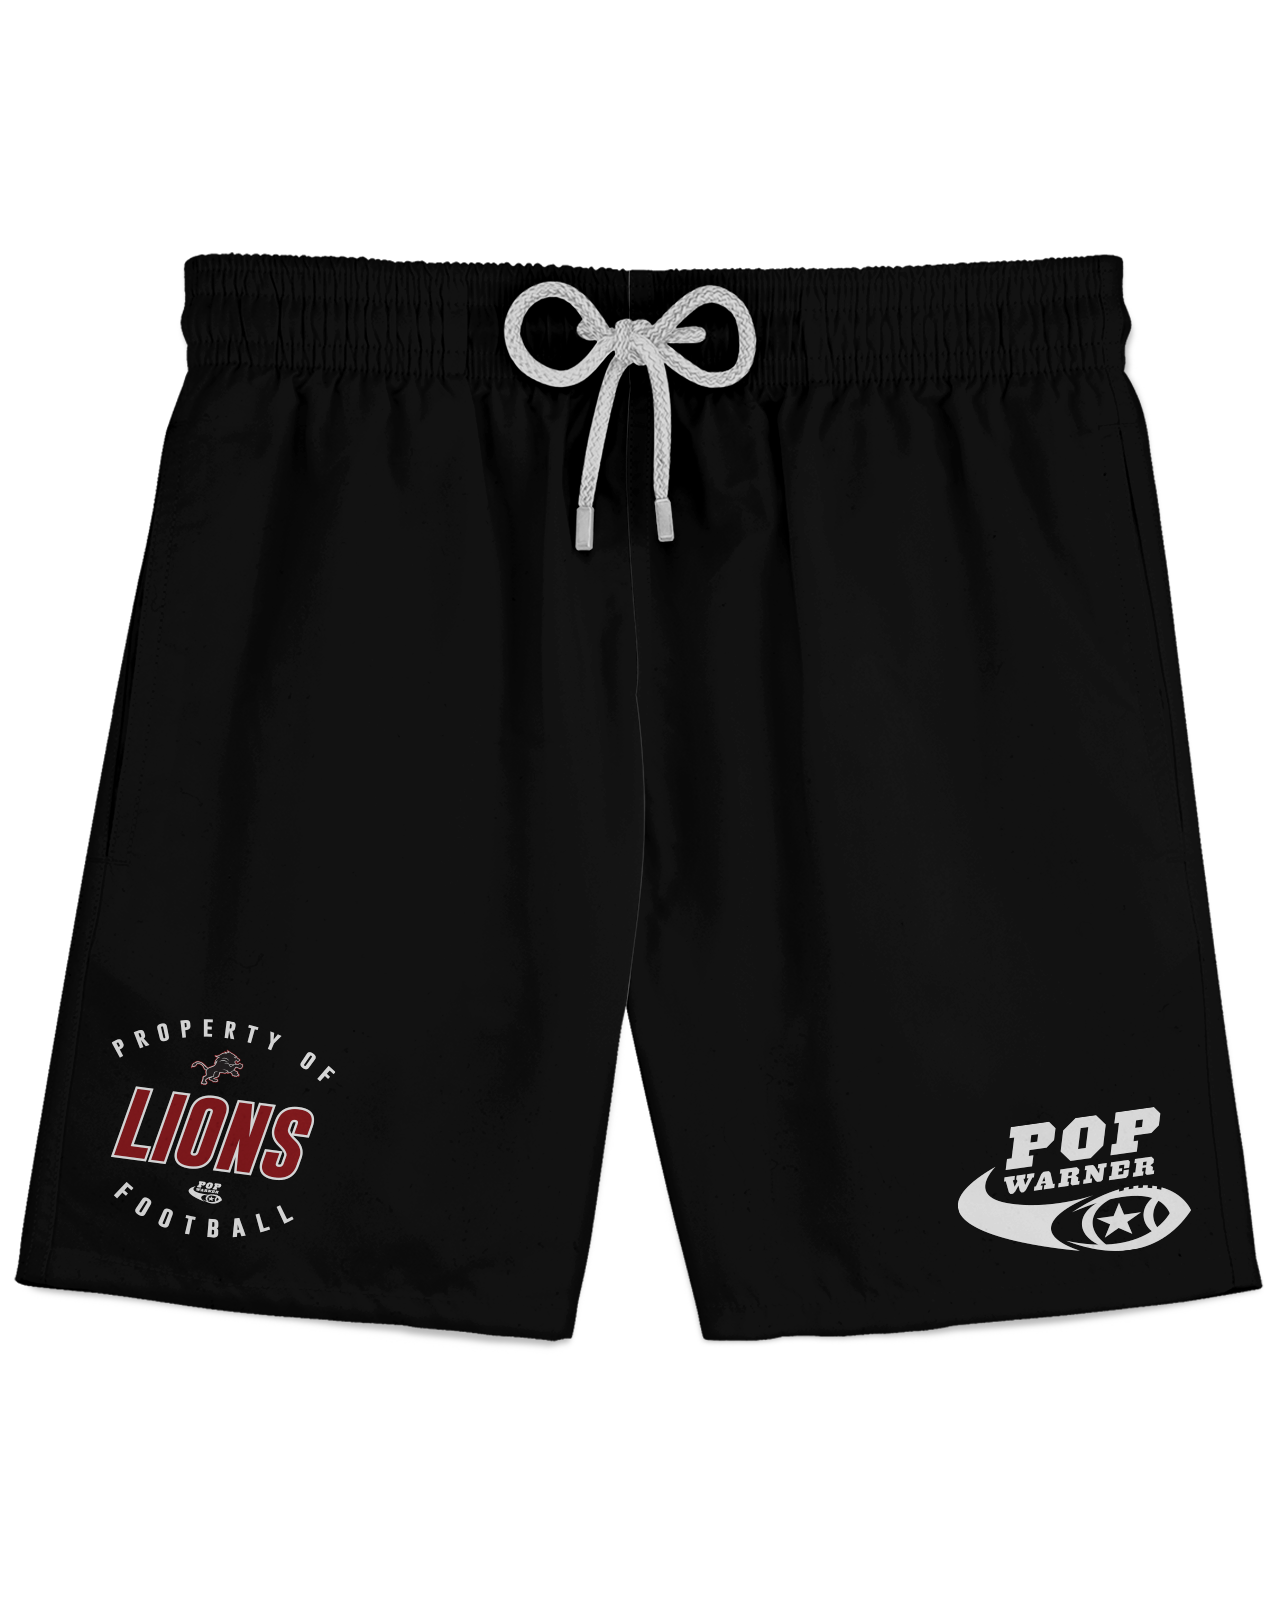 LIONS01  Athletic Shorts    Patriot Sports    Front  View. printed all over in HD on premium fabric. Handmade in California.